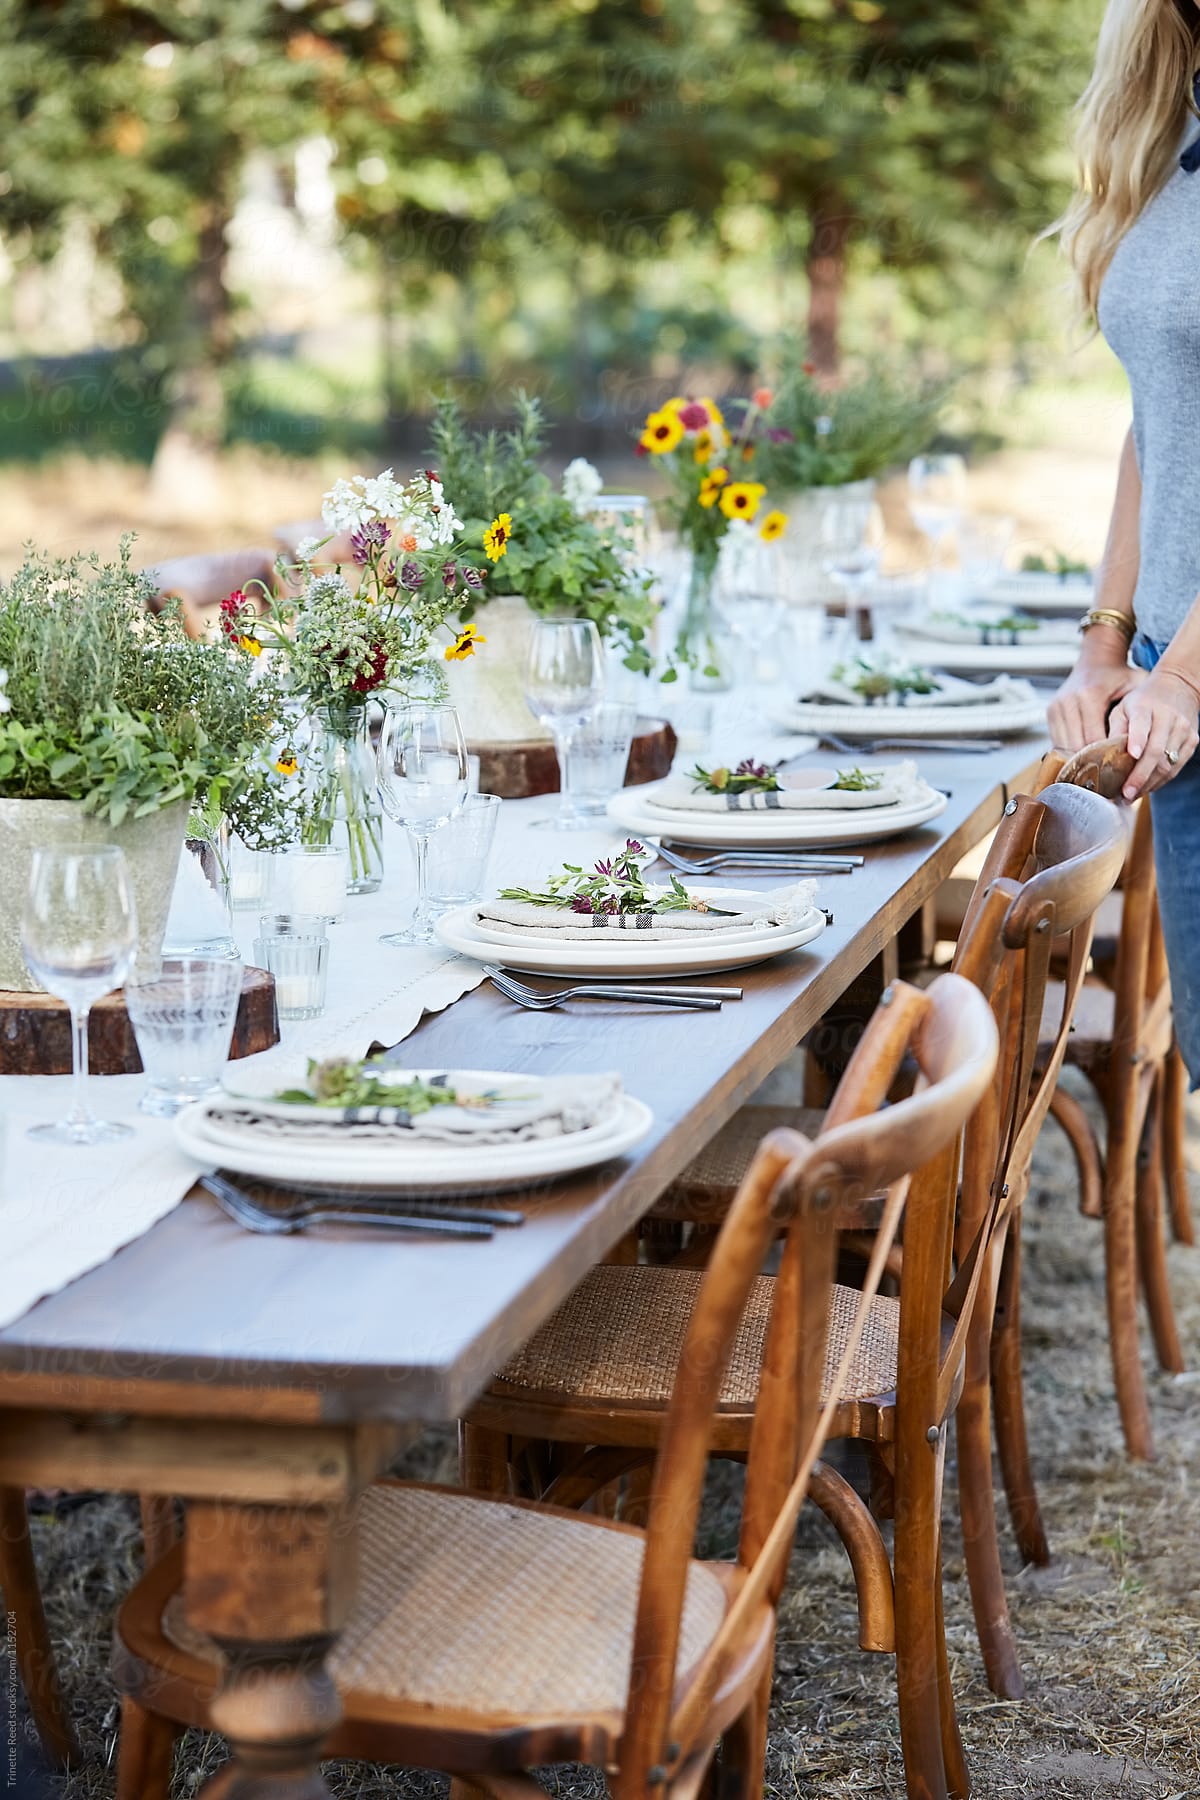 Woman setting the table for a farm to table dinner party